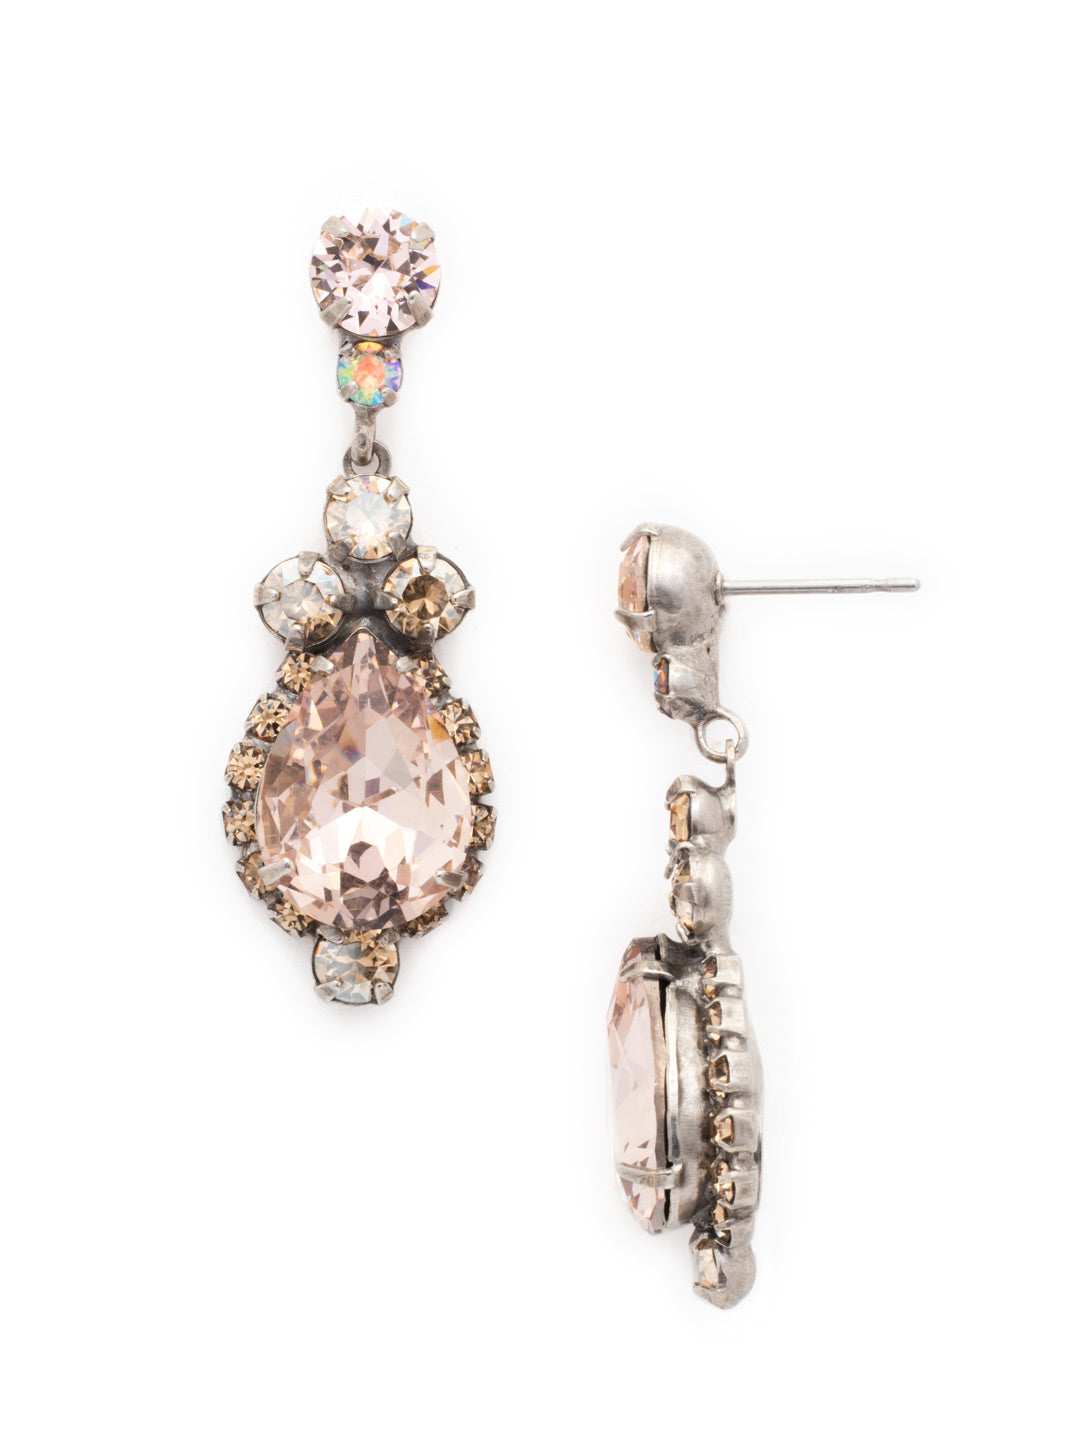 Central Teardrop and Round Crystal Dangle Earrings - EDA55ASSND - Drops of dazzle! A teardrop shaped crystal surrounded by rhinestones dangle from a round crystal post. From Sorrelli's Sand Dune collection in our Antique Silver-tone finish.